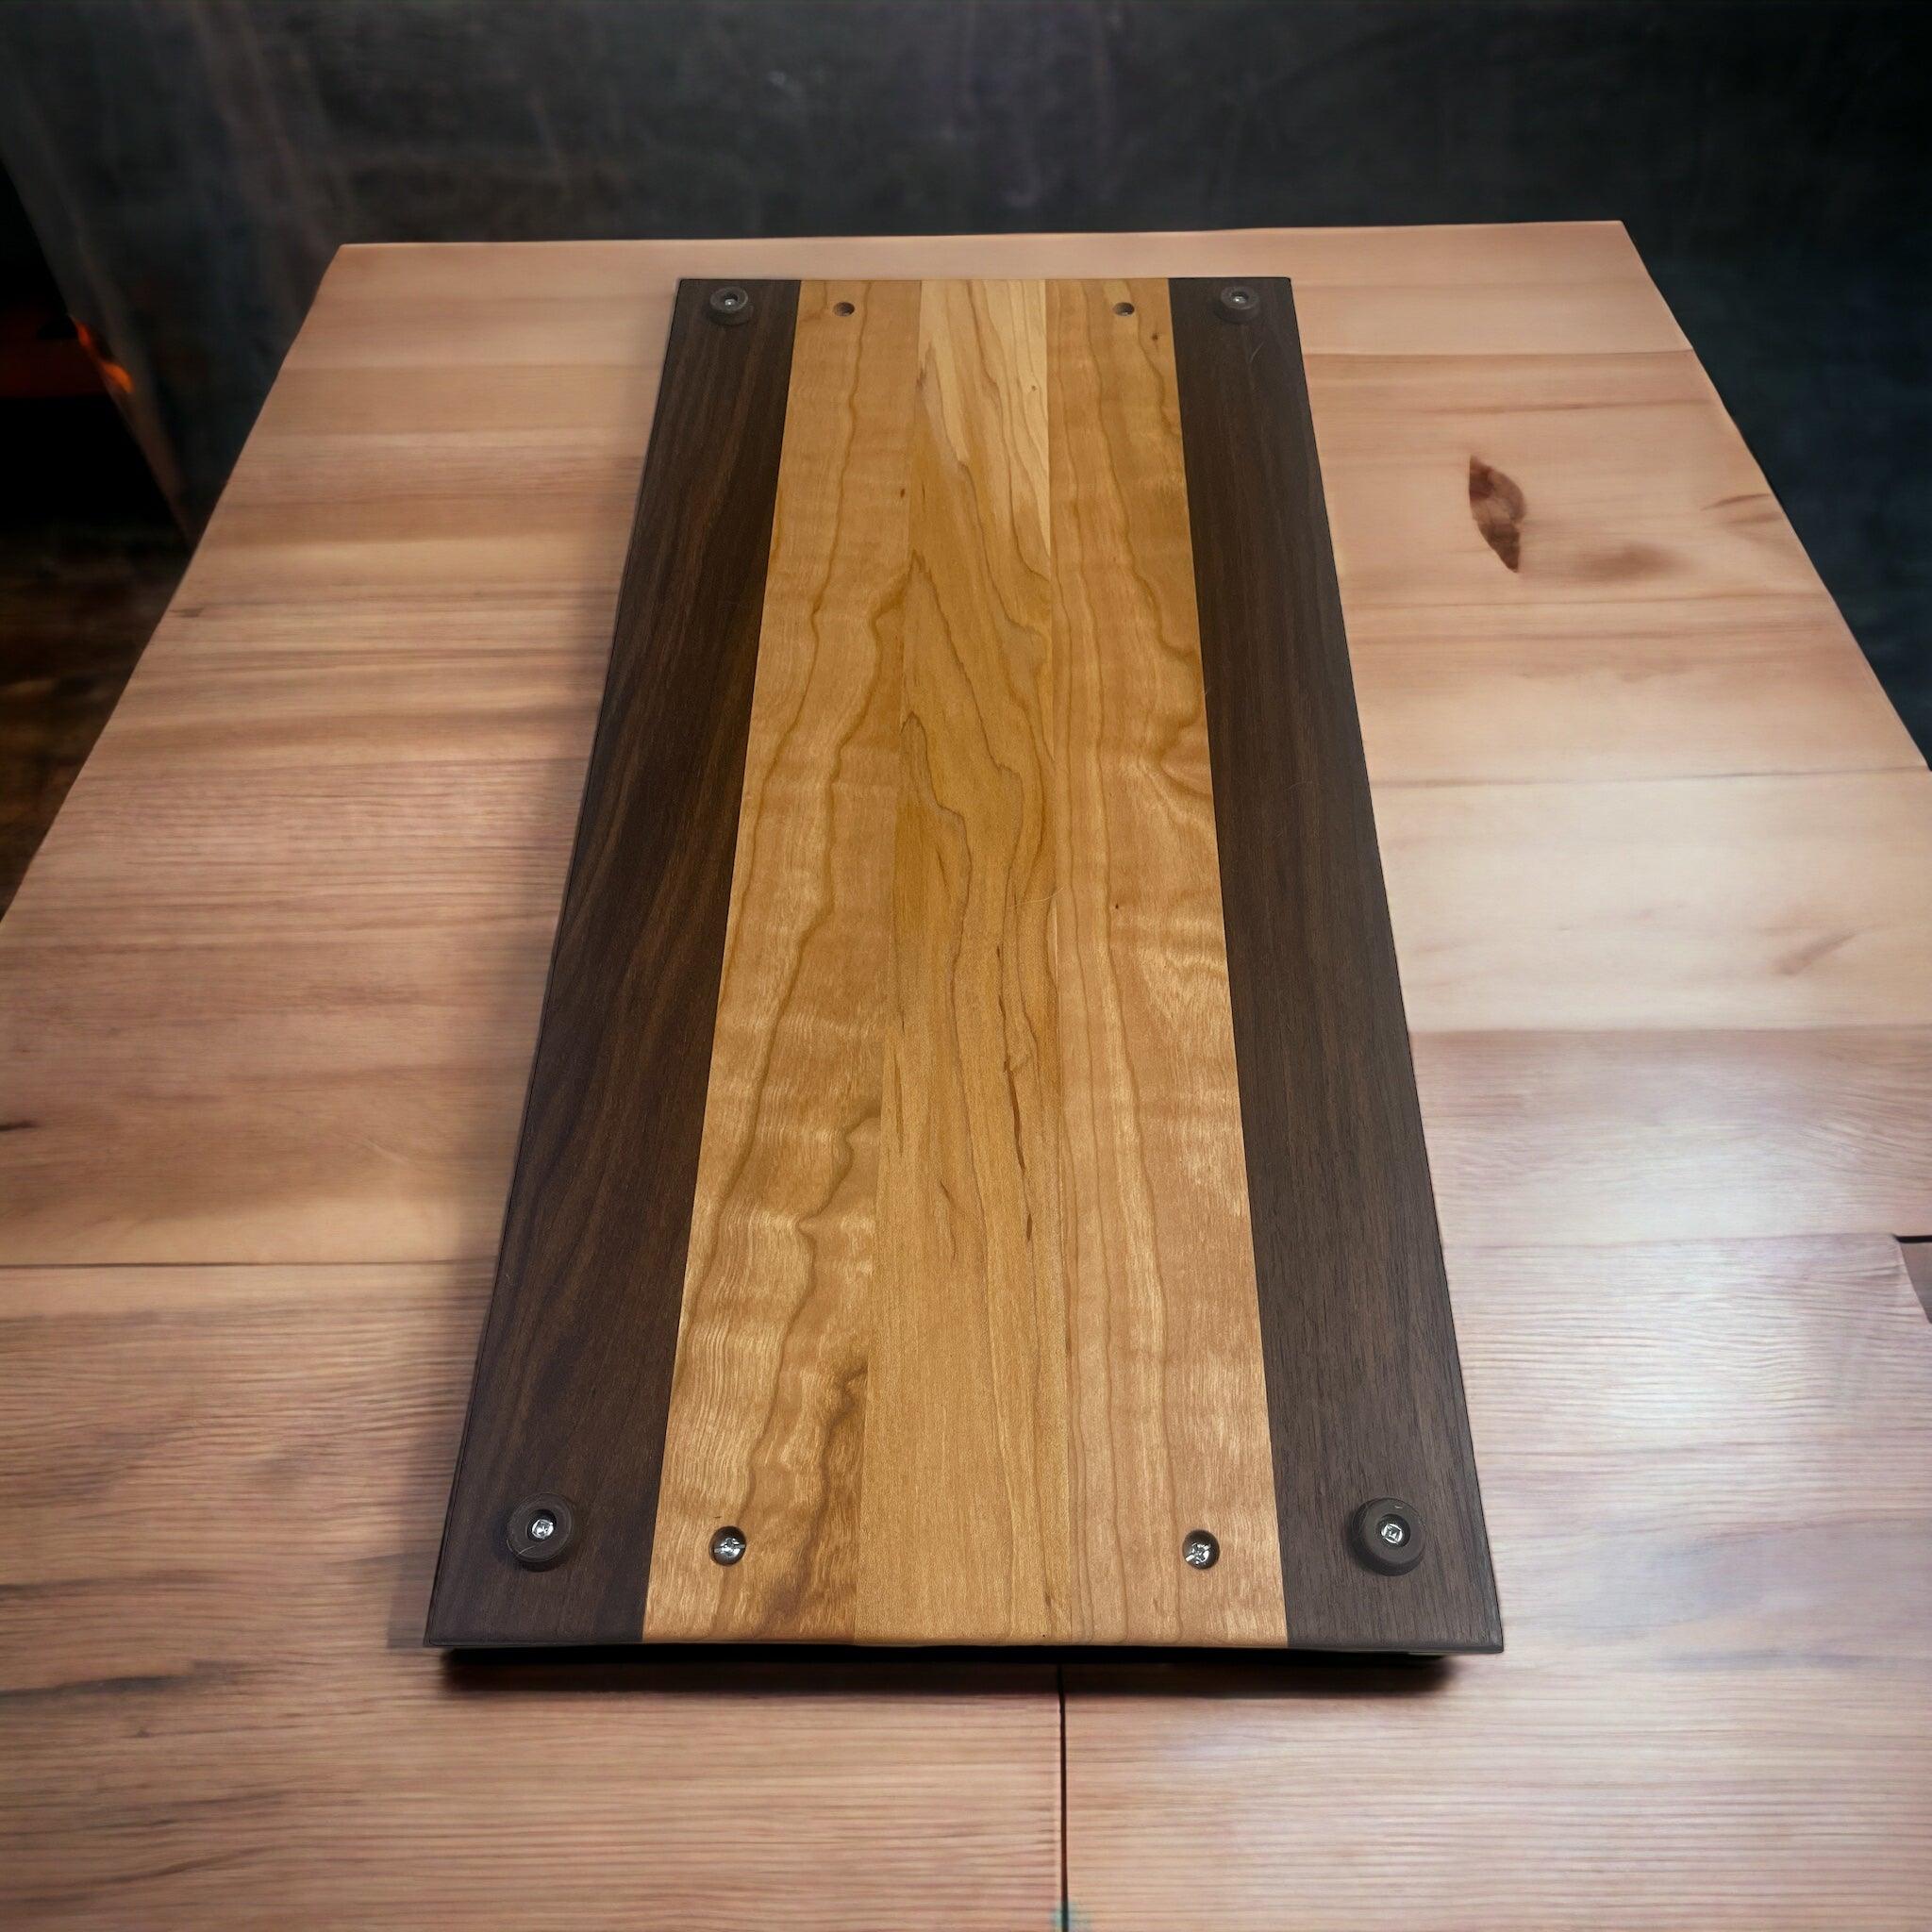 Manitoulin serving board - We have the wood